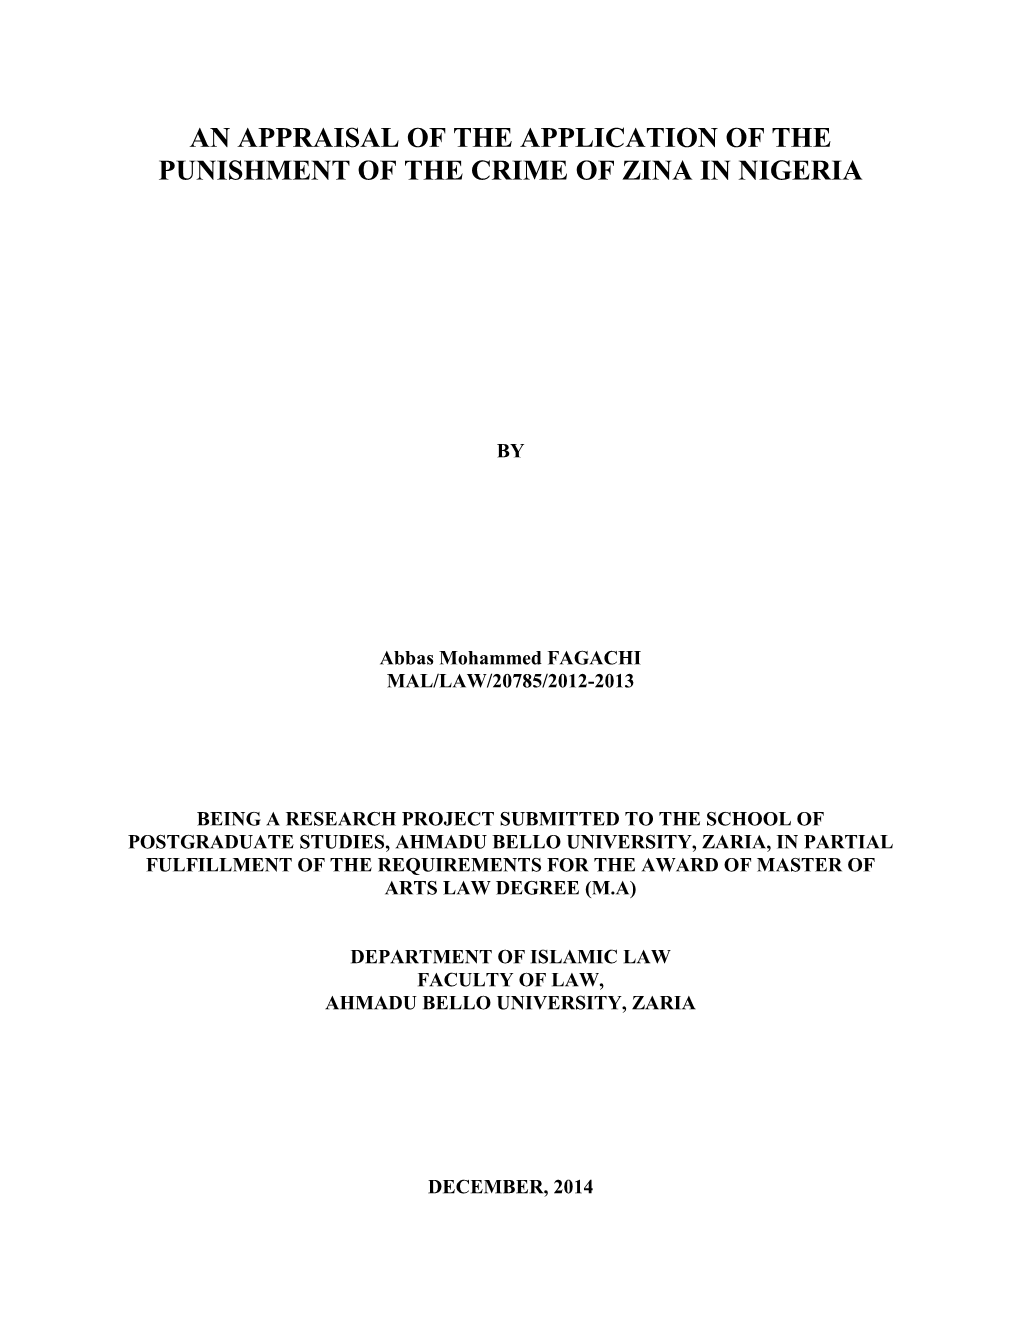 An Appraisal of the Application of the Punishment of the Crime of Zina in Nigeria